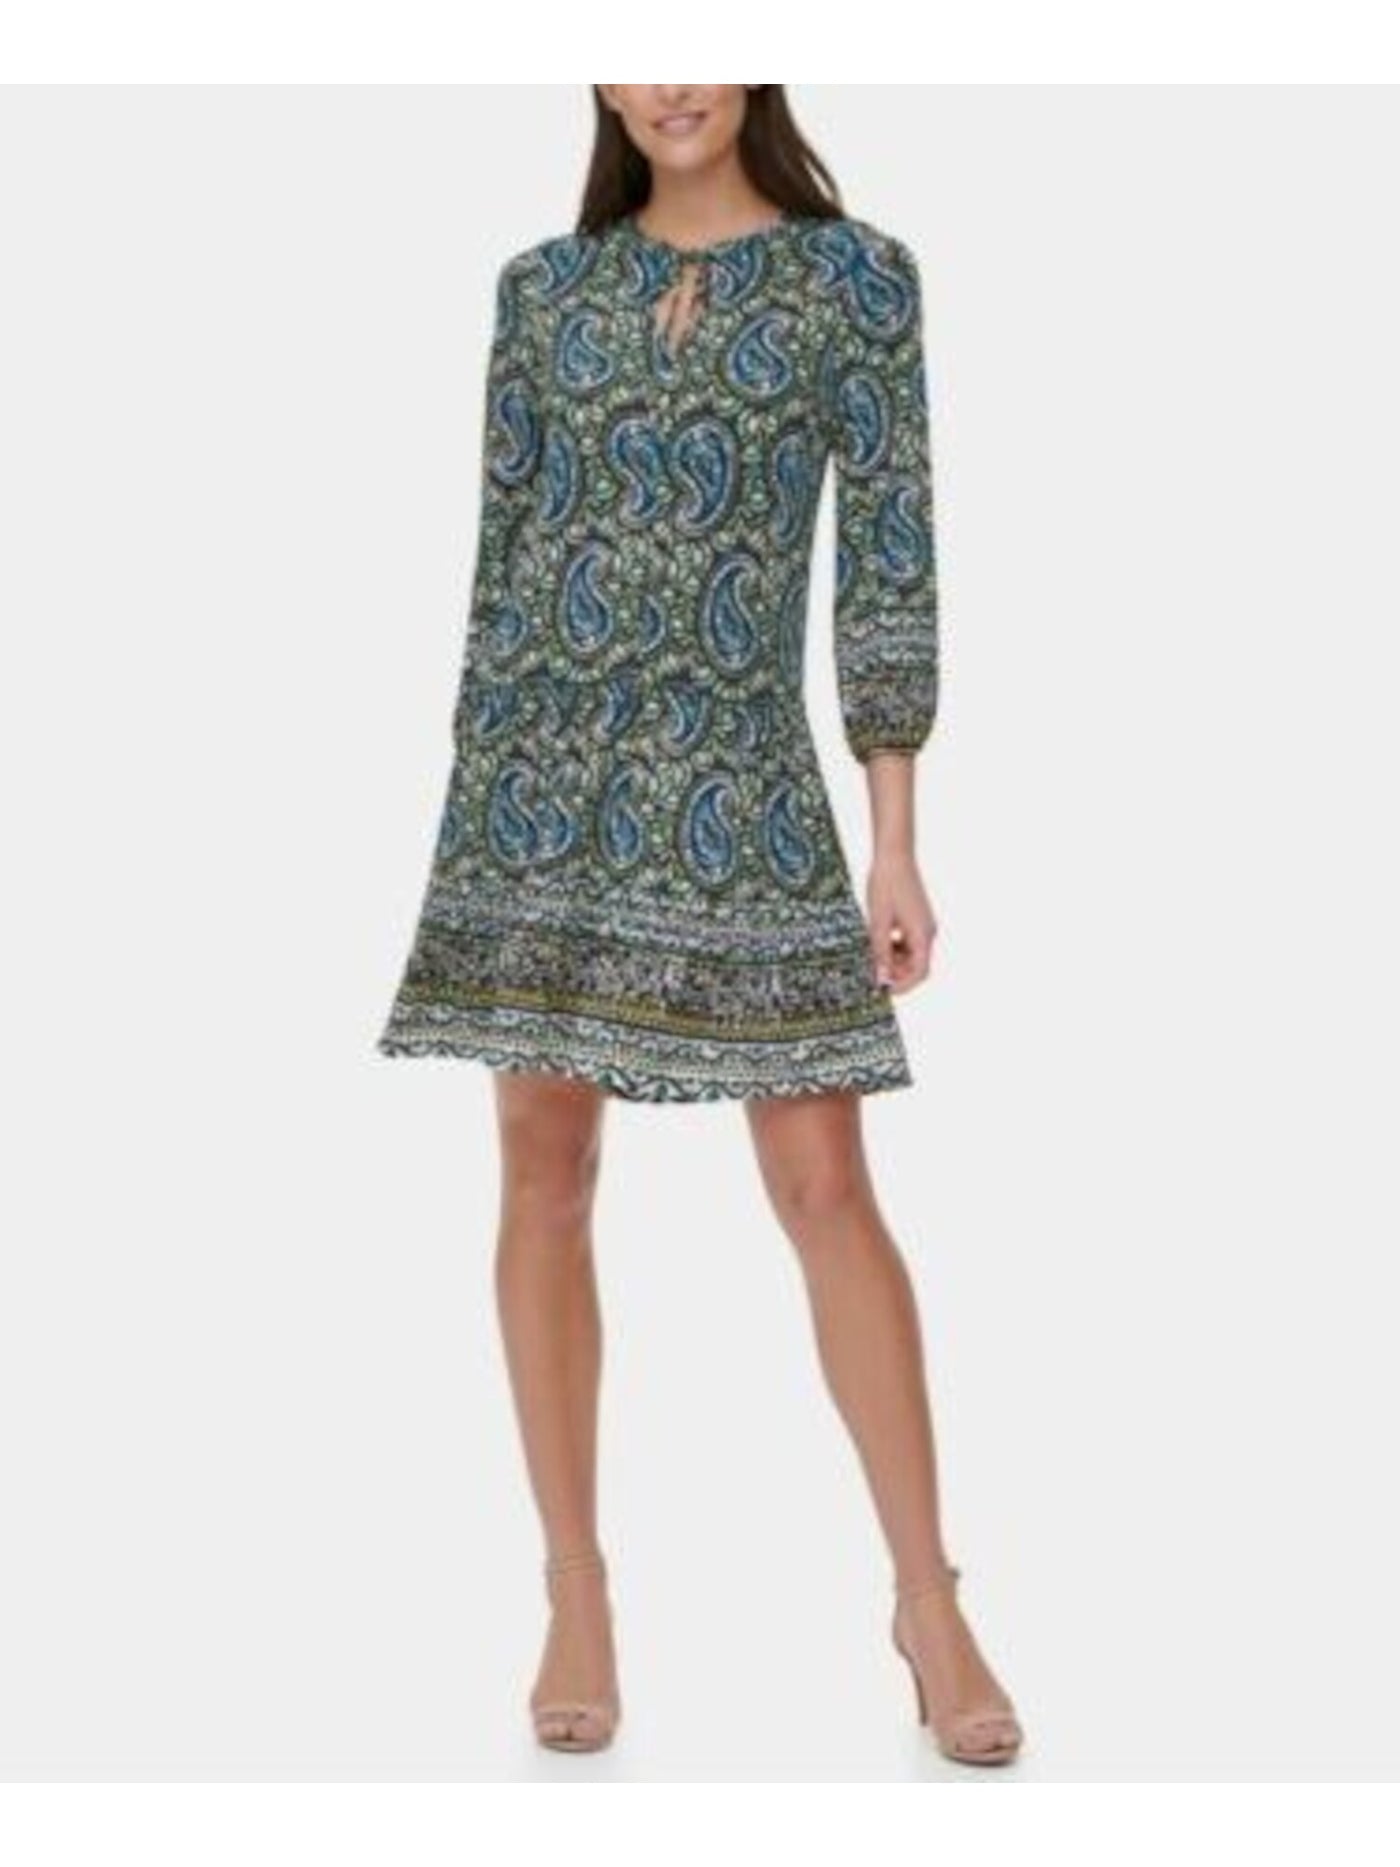 TOMMY HILFIGER Womens Blue Stretch Paisley 3/4 Sleeve Tie Neck Above The Knee Wear To Work Fit + Flare Dress Plus 18W